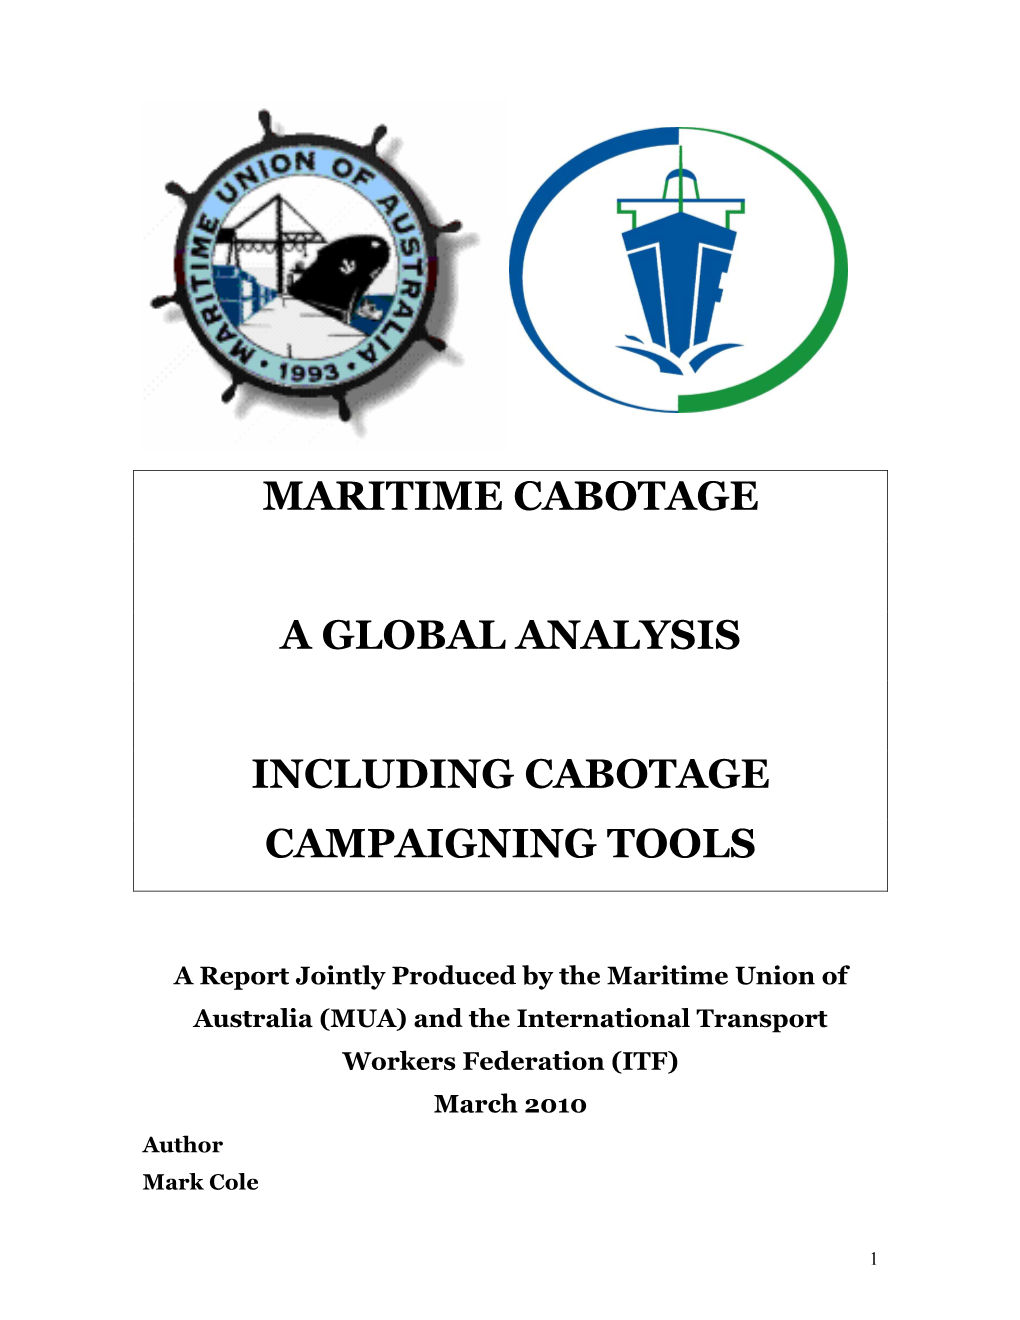 US Maritime Cabotage Task Force Track Record (An Edited Extract from MCTF Web Site)